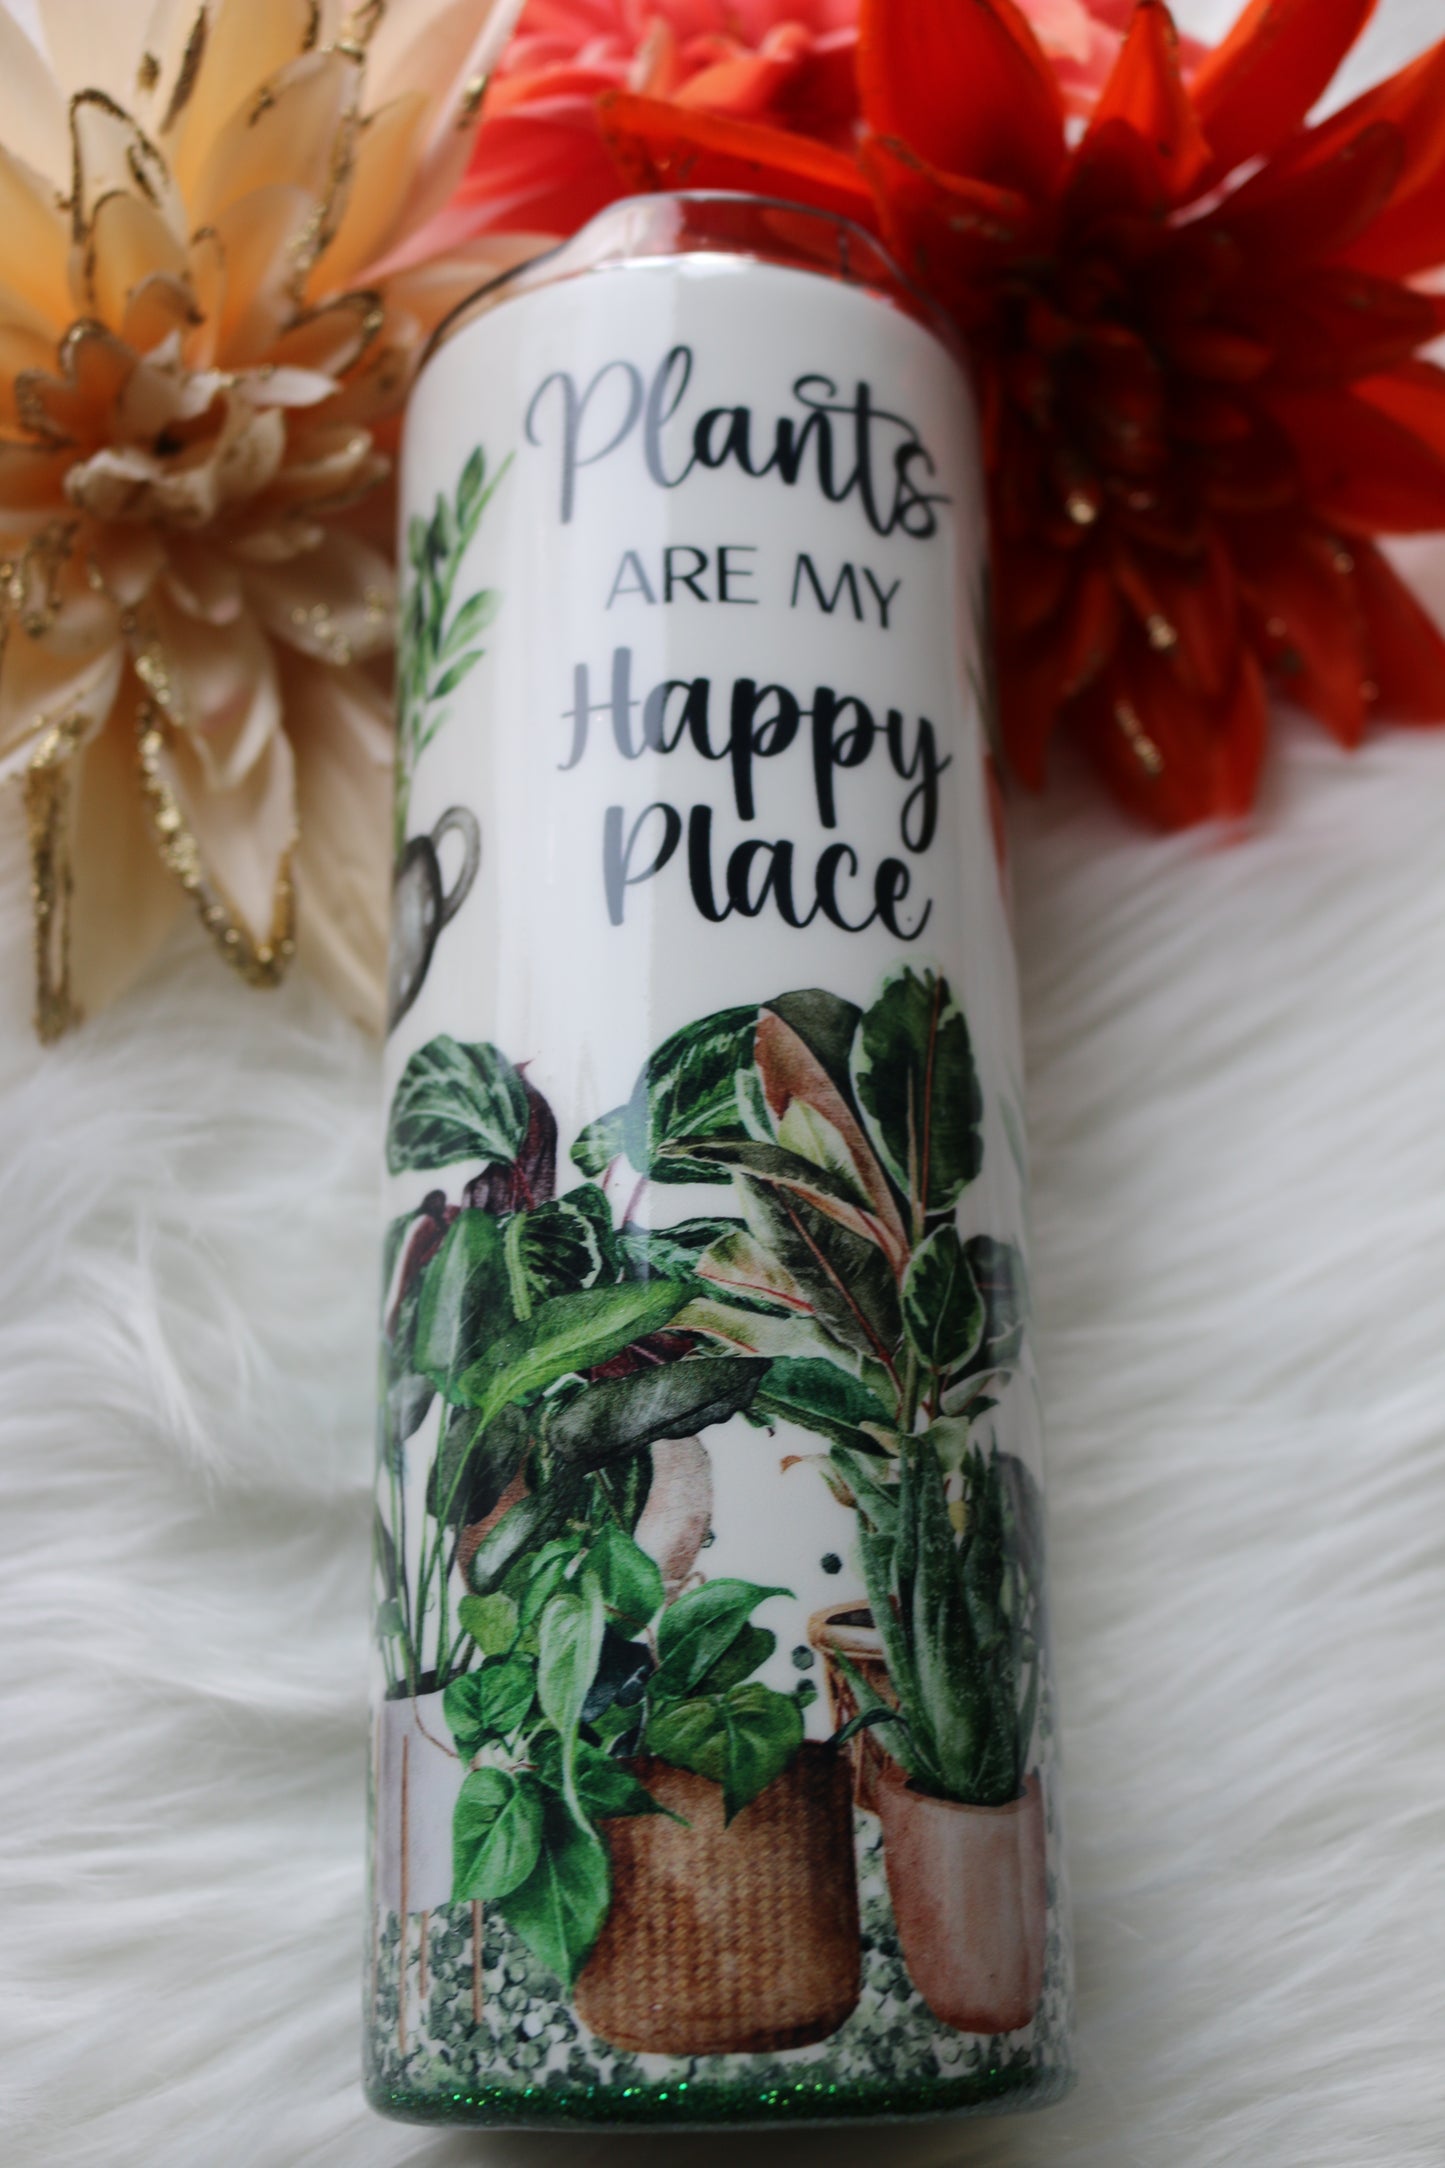 20 oz "Plants are my Happy Place" Stainless Steal Tumbler